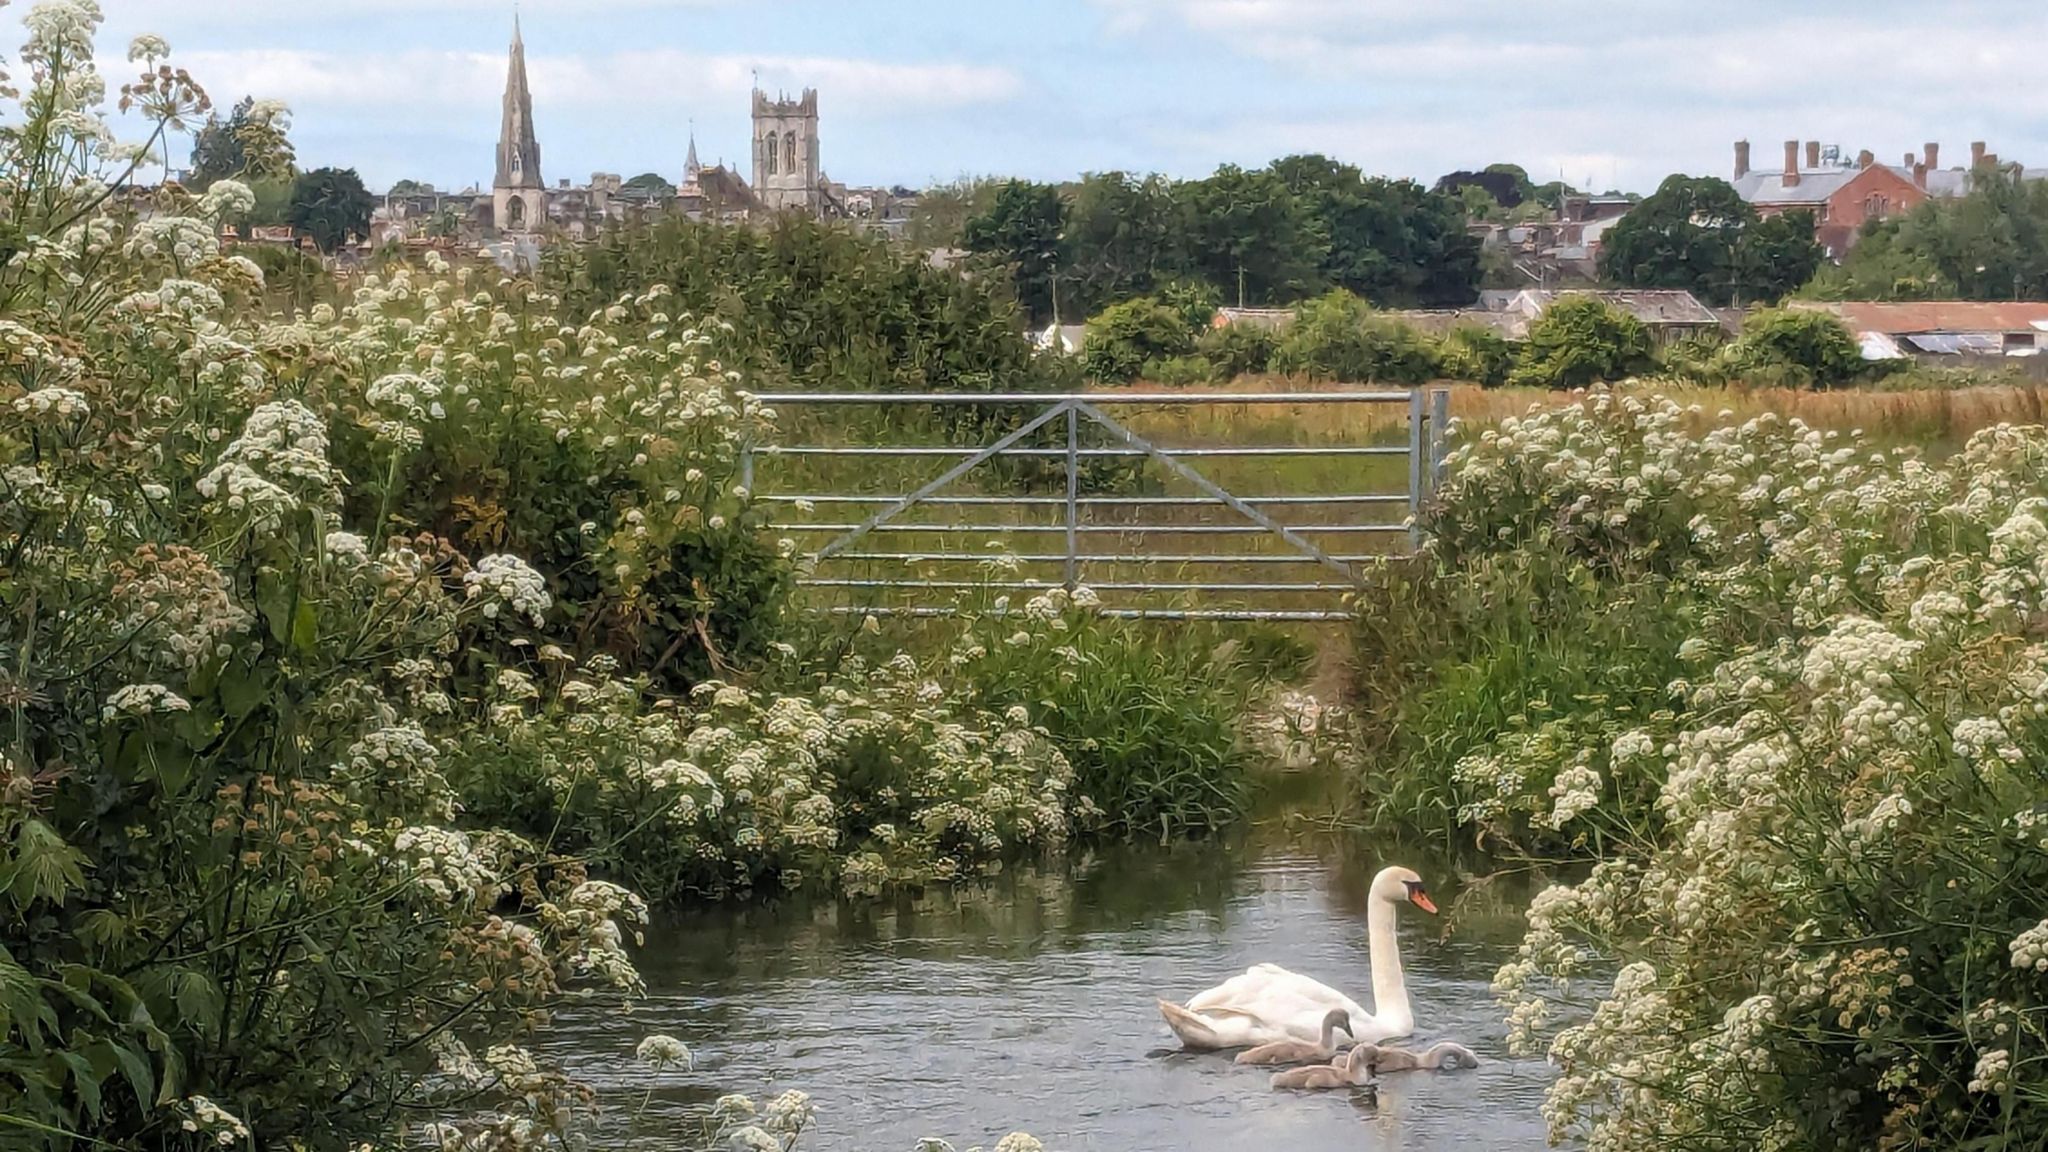 MONDAY - Swans and cygnets swimming near a metal gate surrounded by white flowers with Dorchester's skyline in the distance